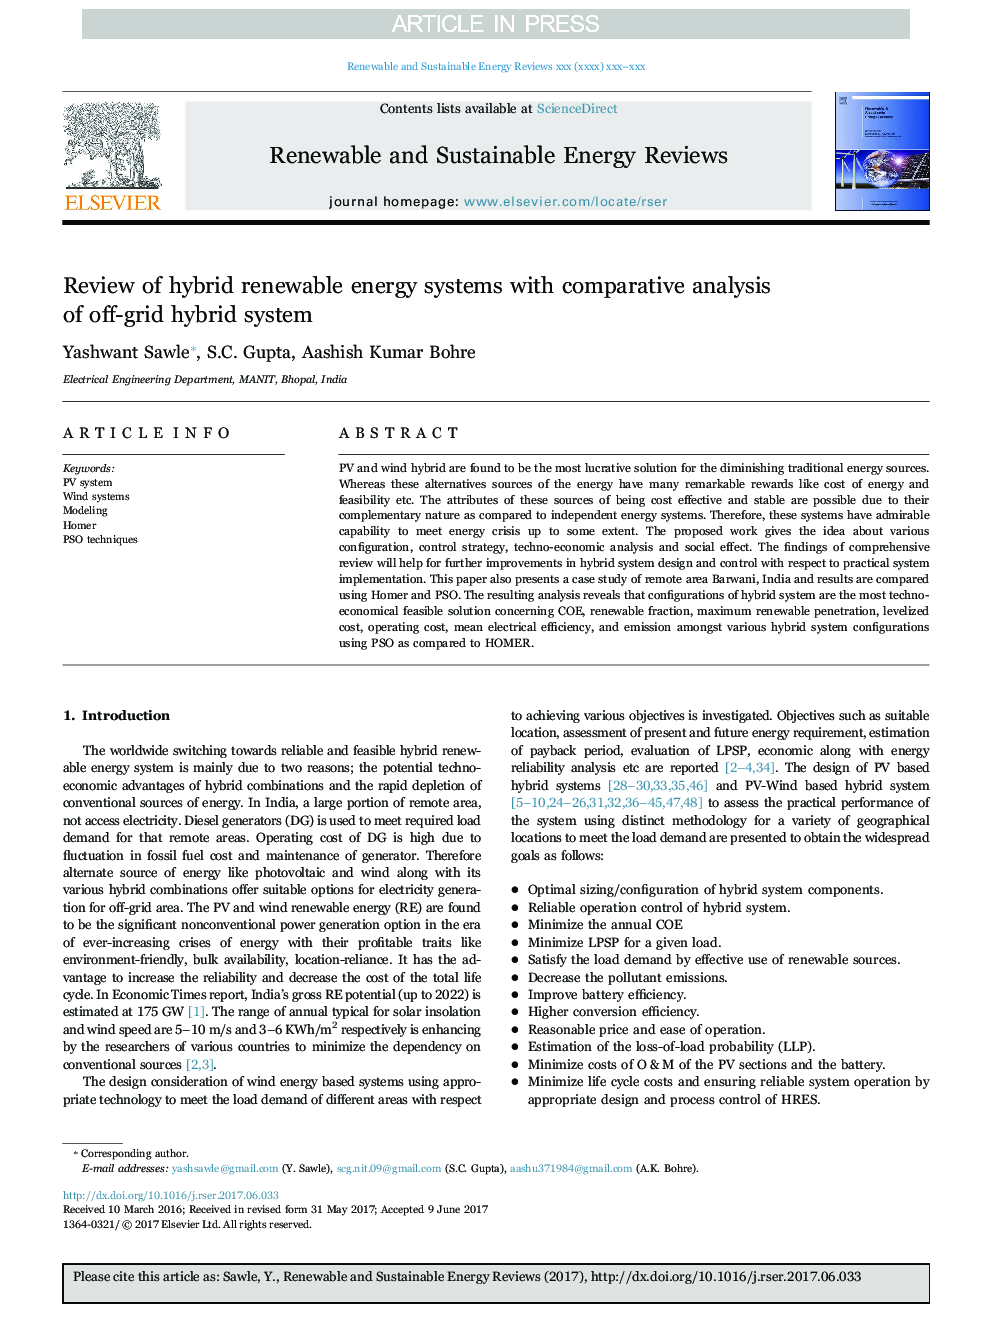 Review of hybrid renewable energy systems with comparative analysis of off-grid hybrid system